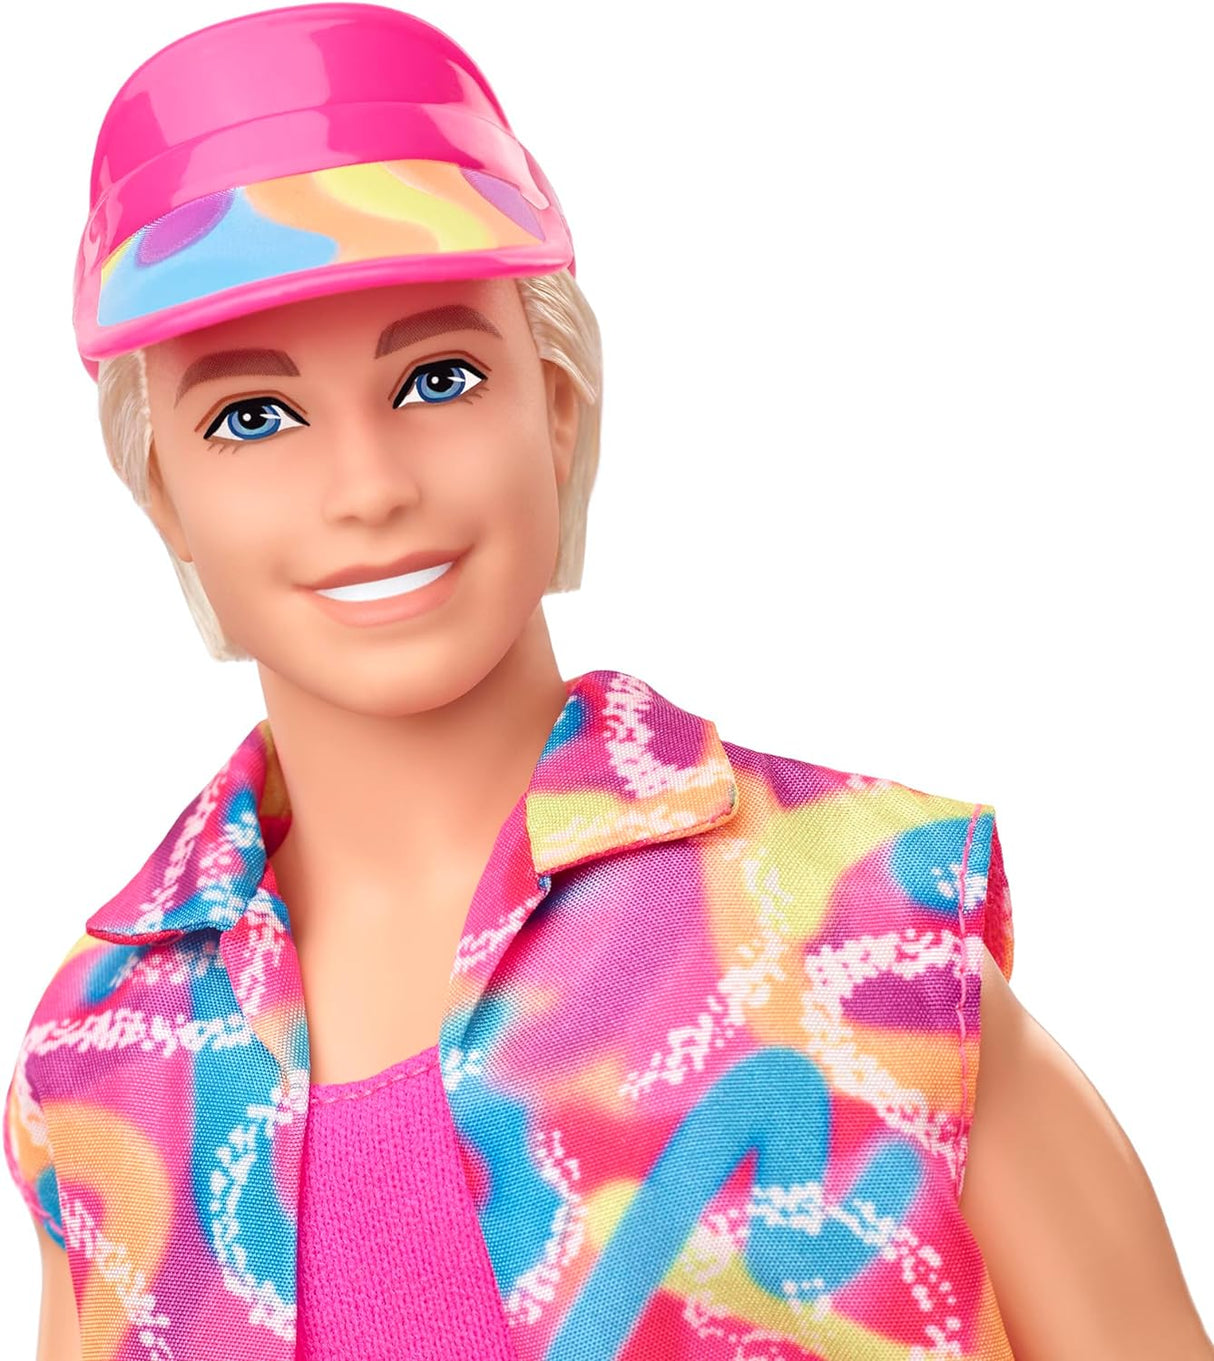 Barbie Ken Doll from Barbie The Movie